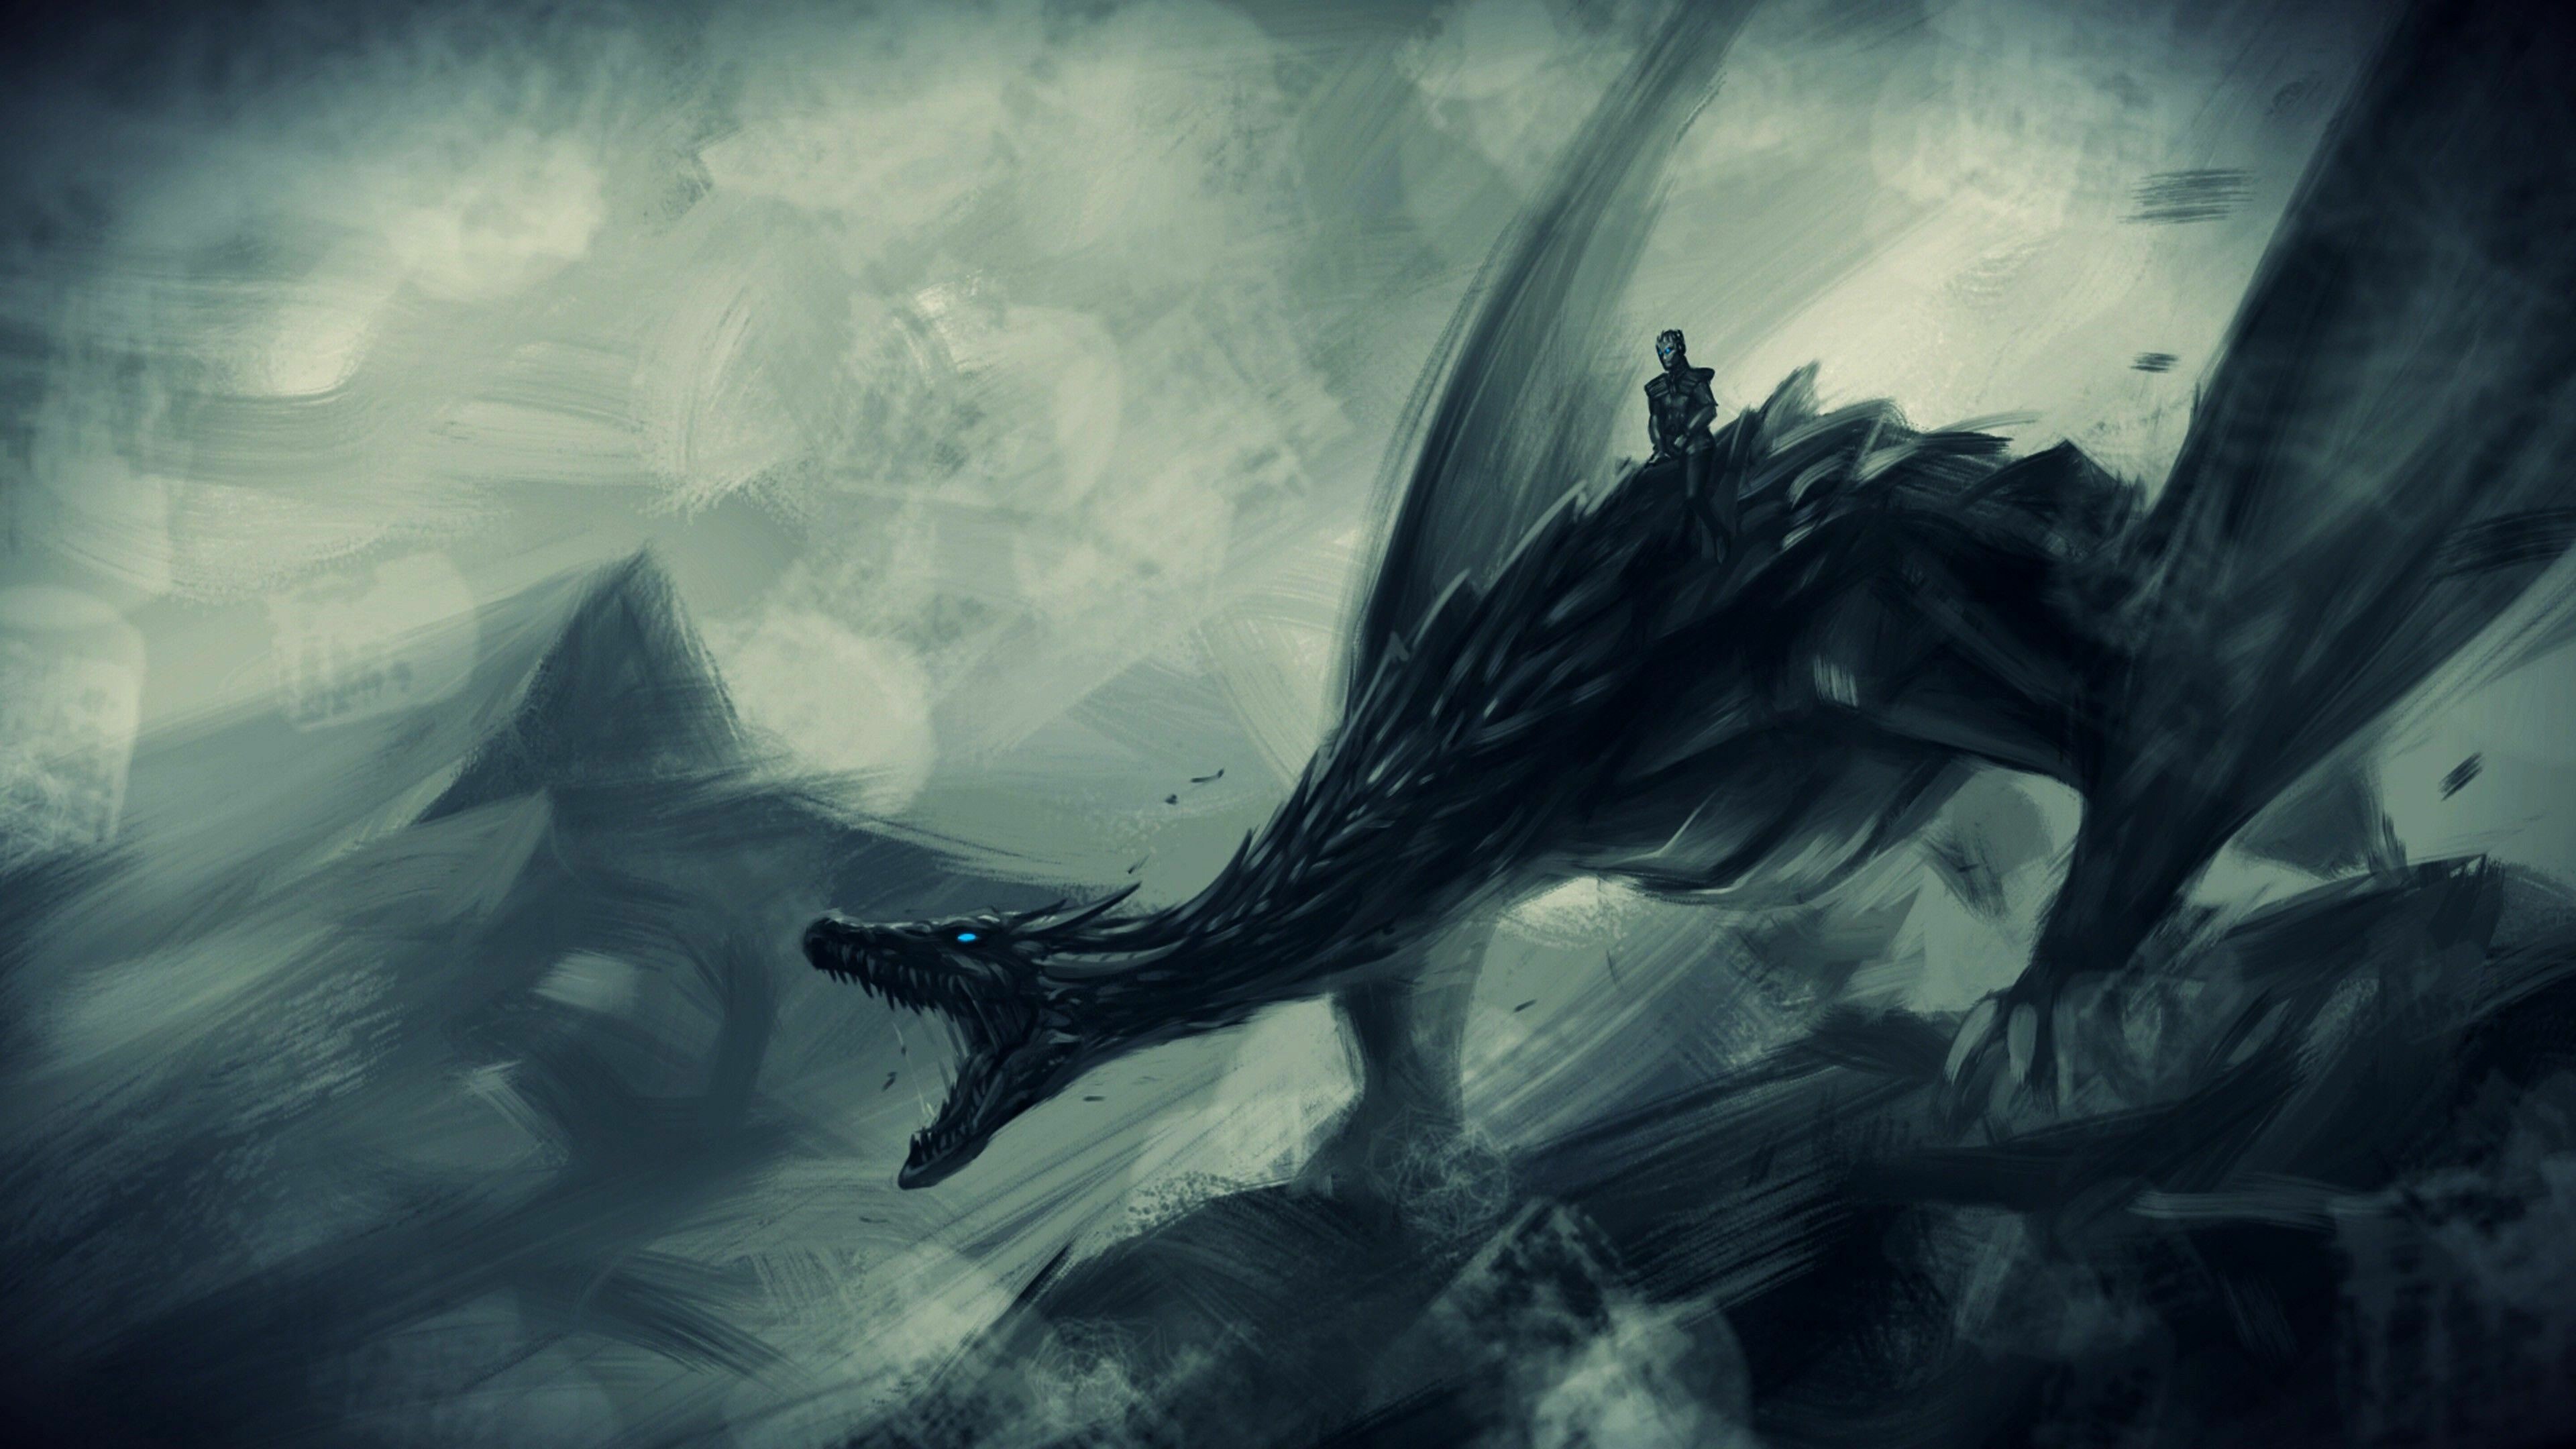 Dragon: Massive, flying reptiles that can breathe fire, Game Of Thrones. 3840x2160 4K Wallpaper.